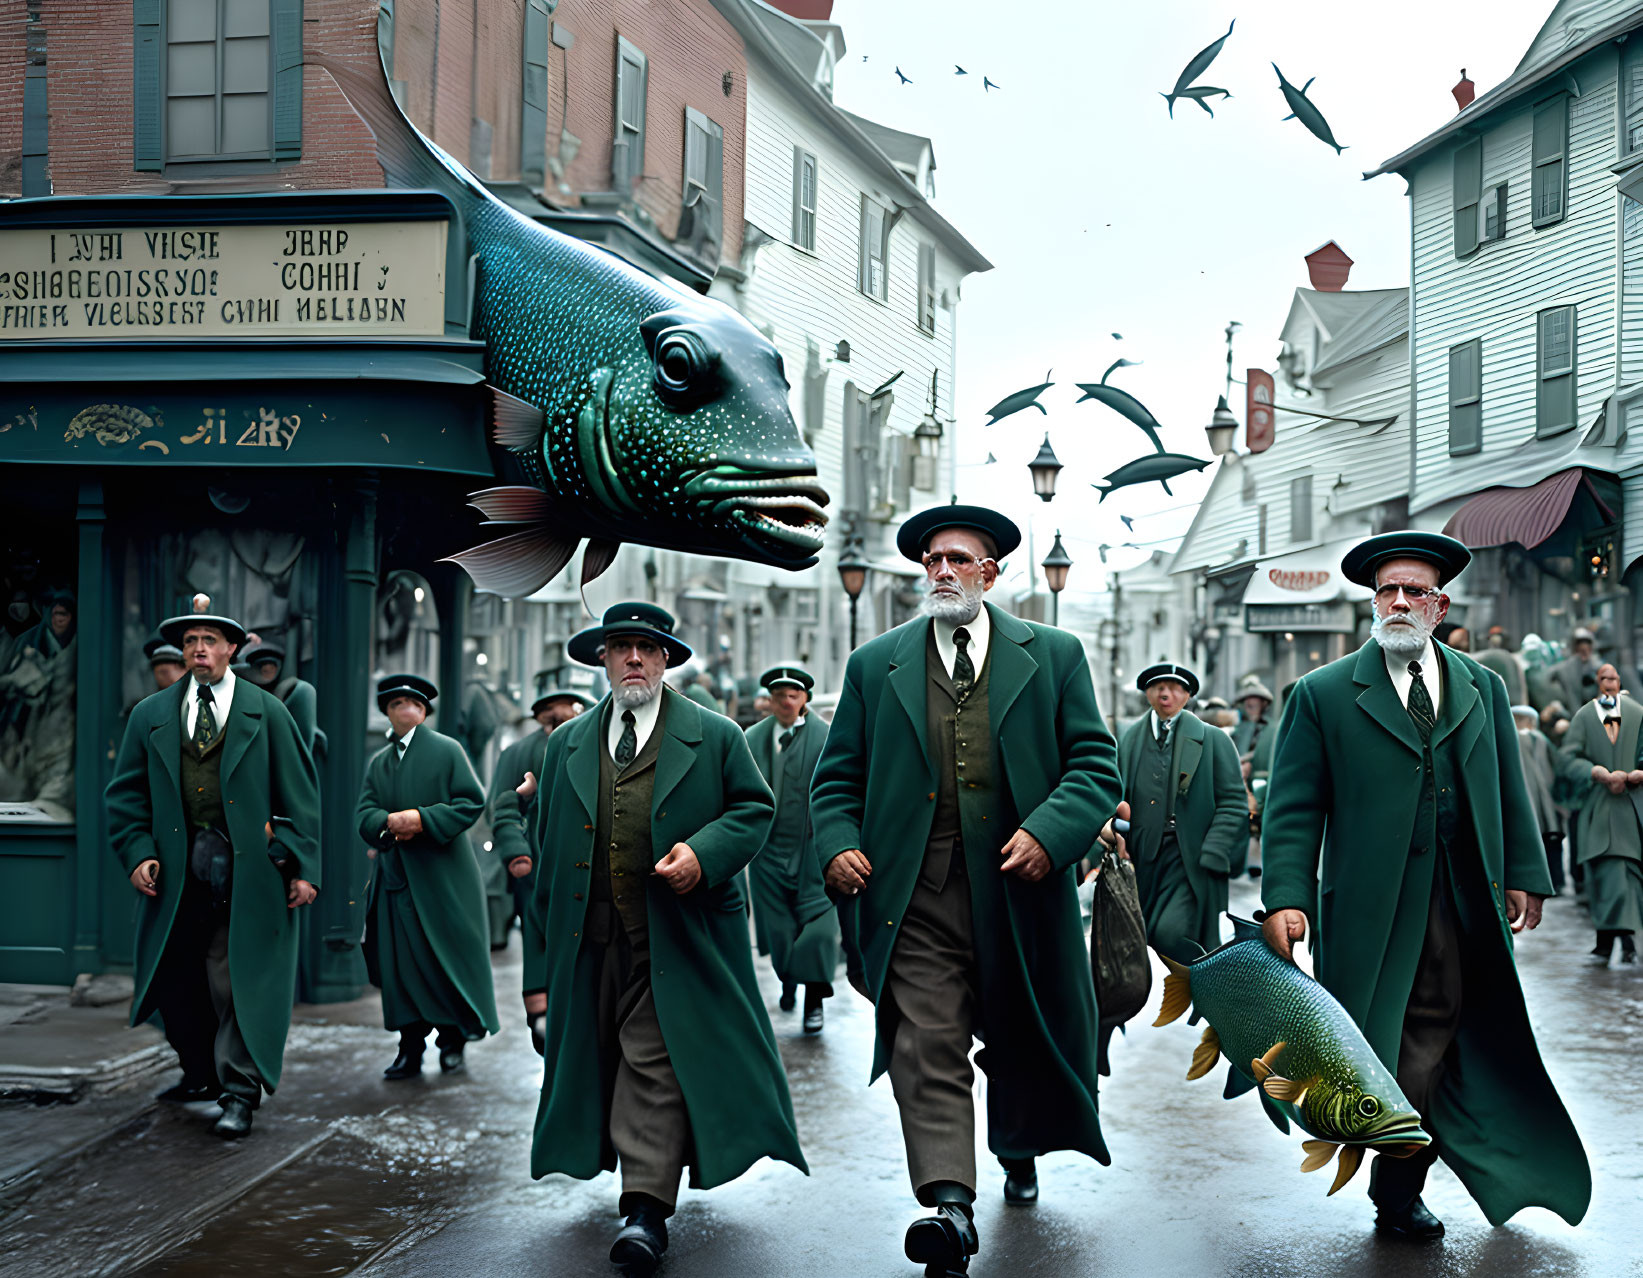 Men in green coats carrying giant fish on old-fashioned street with seabirds and fish shop sign